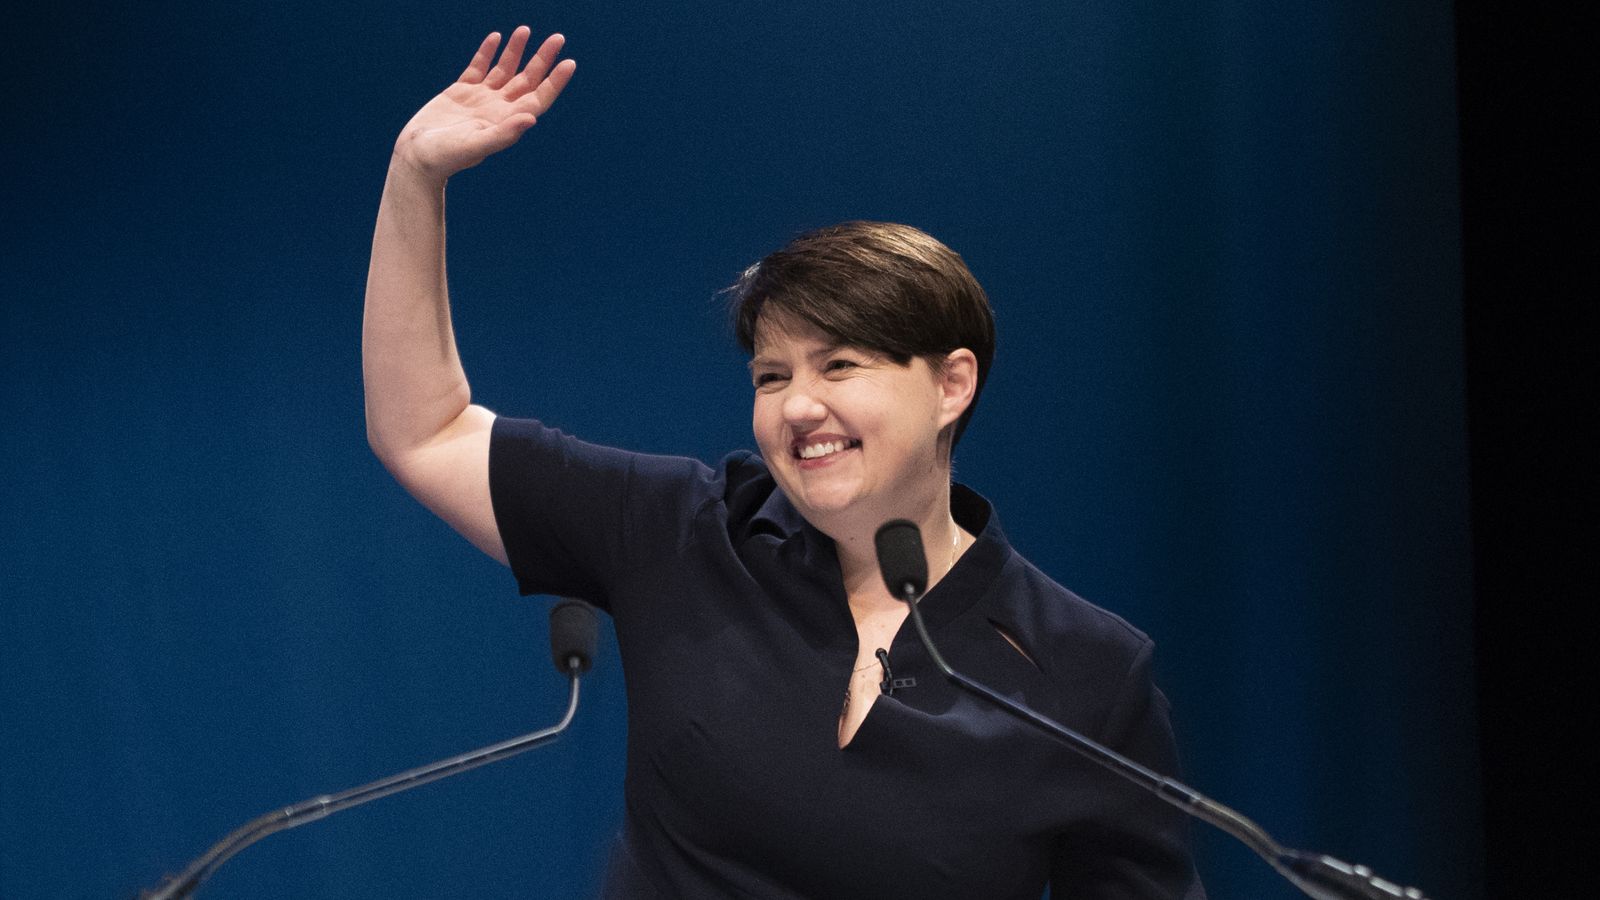 Ruth Davidson says mental health history meant she almost did not run as Scottish Tory leader